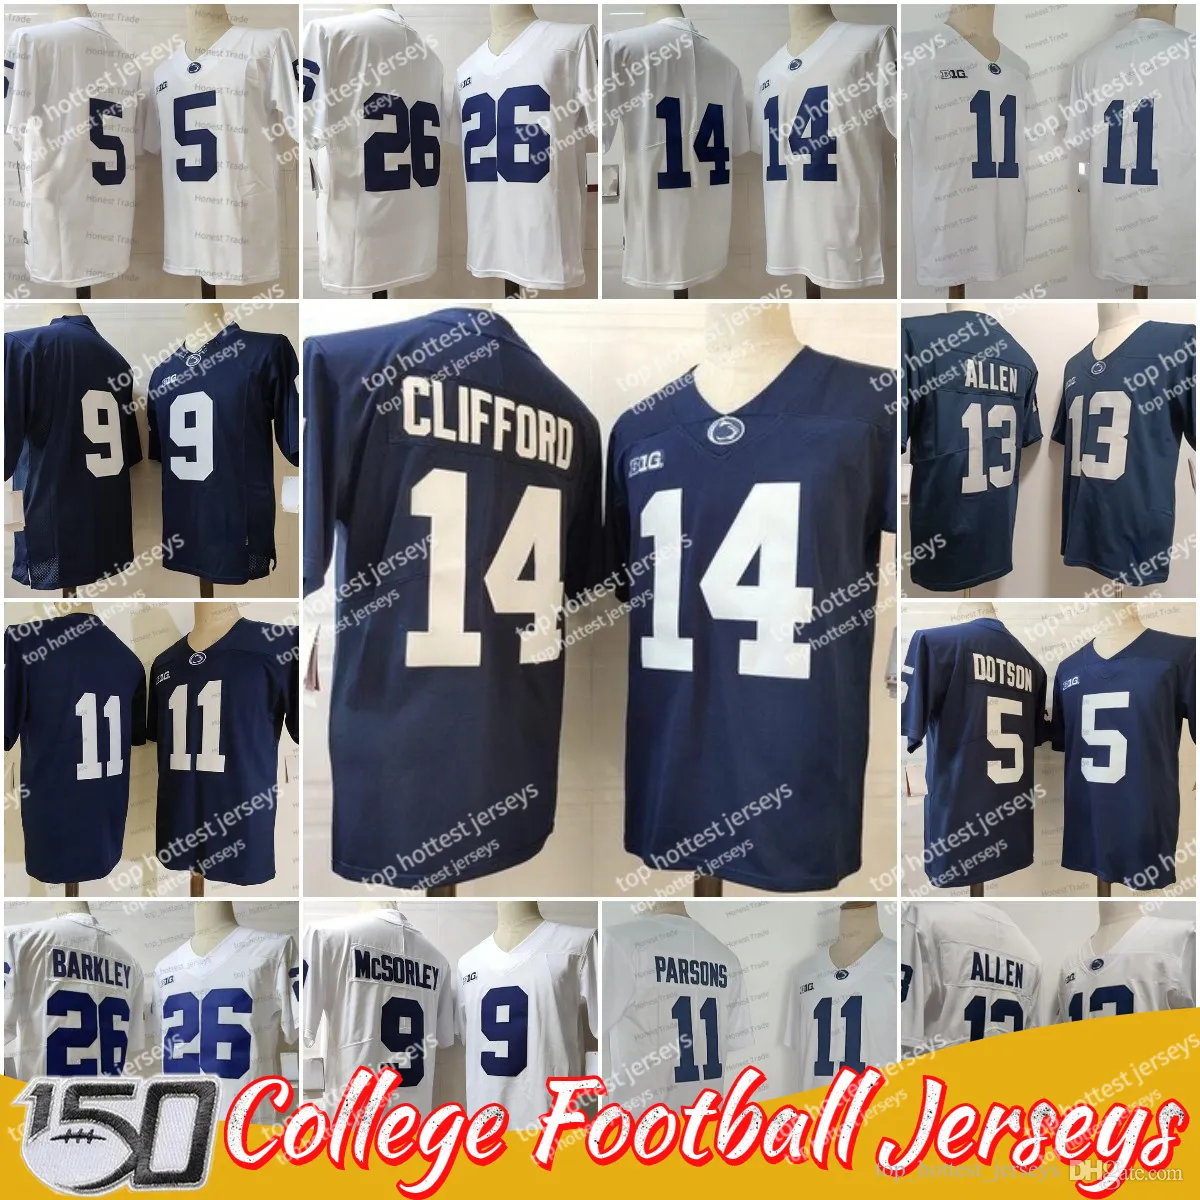 Penn State Nittany Football Jersey 13 Kaytron Allen 11 Micah Parsons 14 Sean Clifford Saquon Barkley 5 Jahan Dotson Trace McSorley Navy White Mens Jerseys Stitched